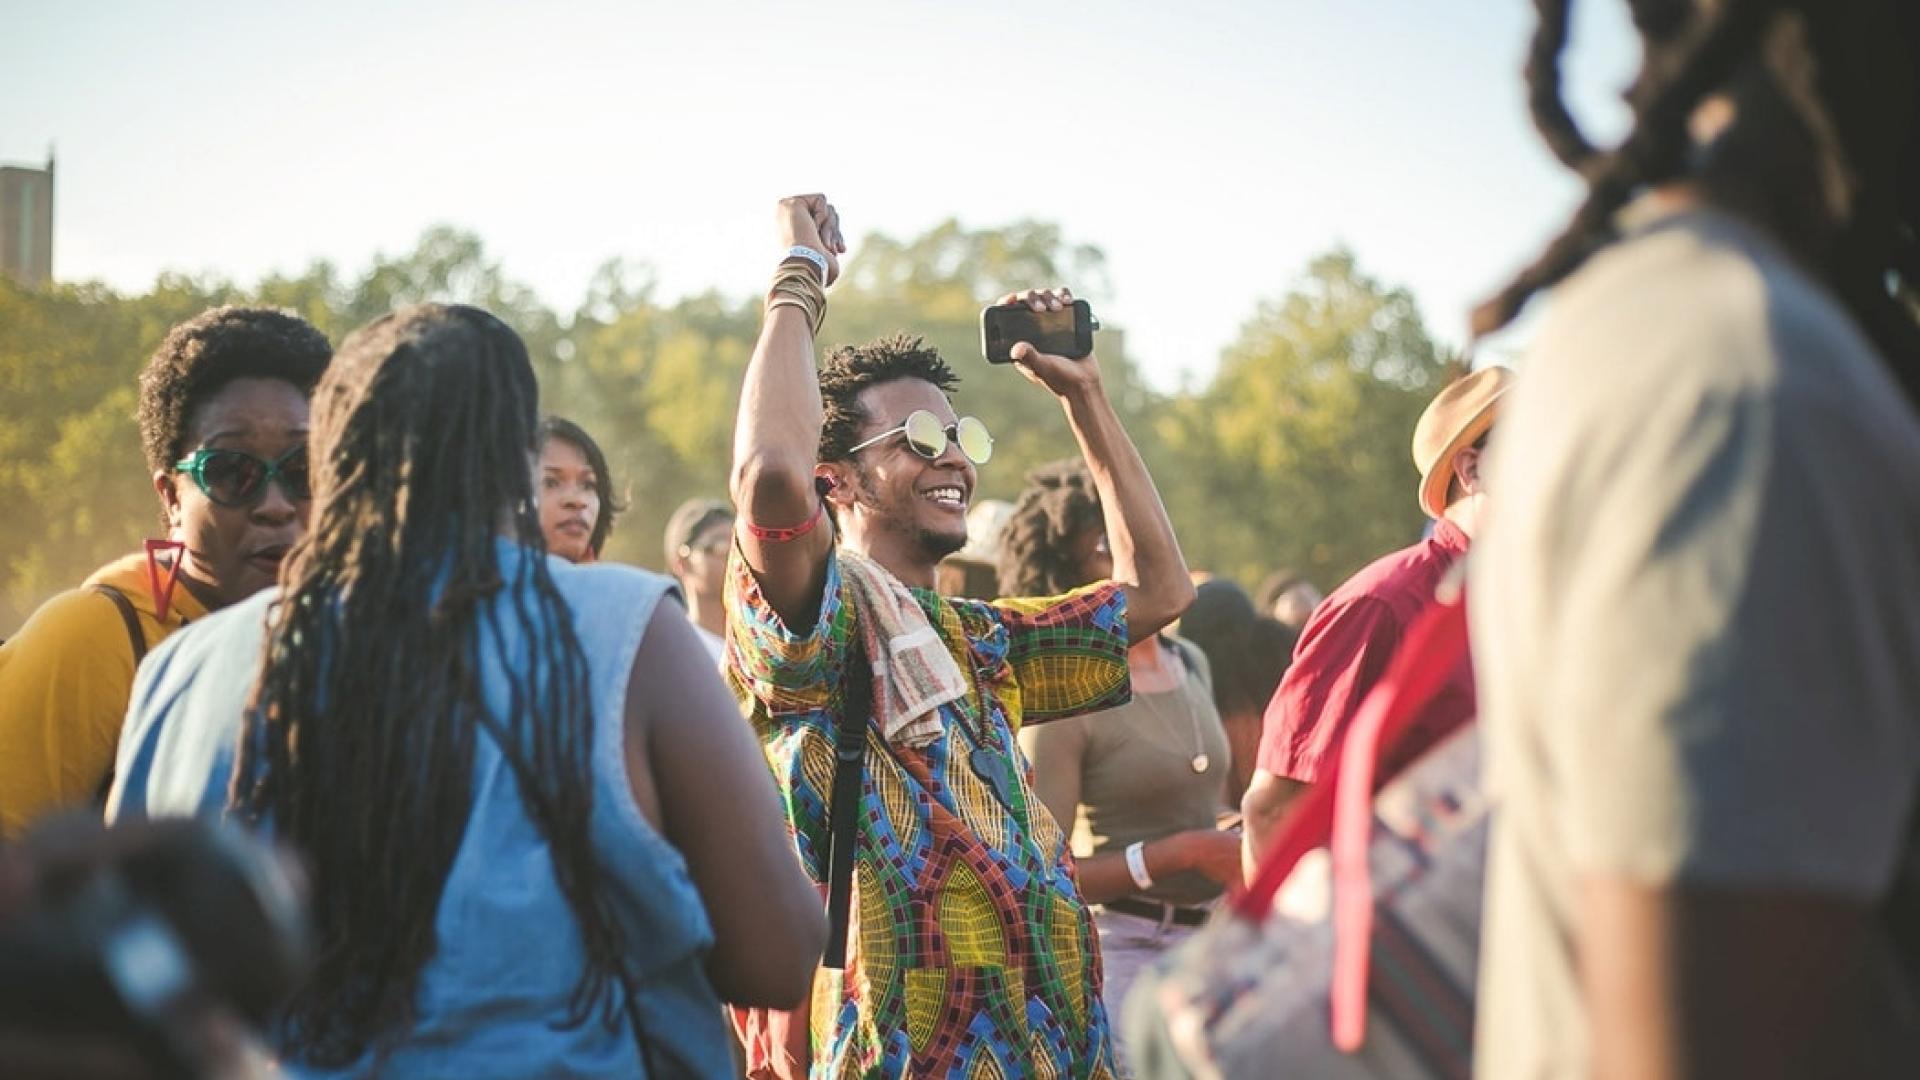 Keep up the tempo with these must-see summer music festivals